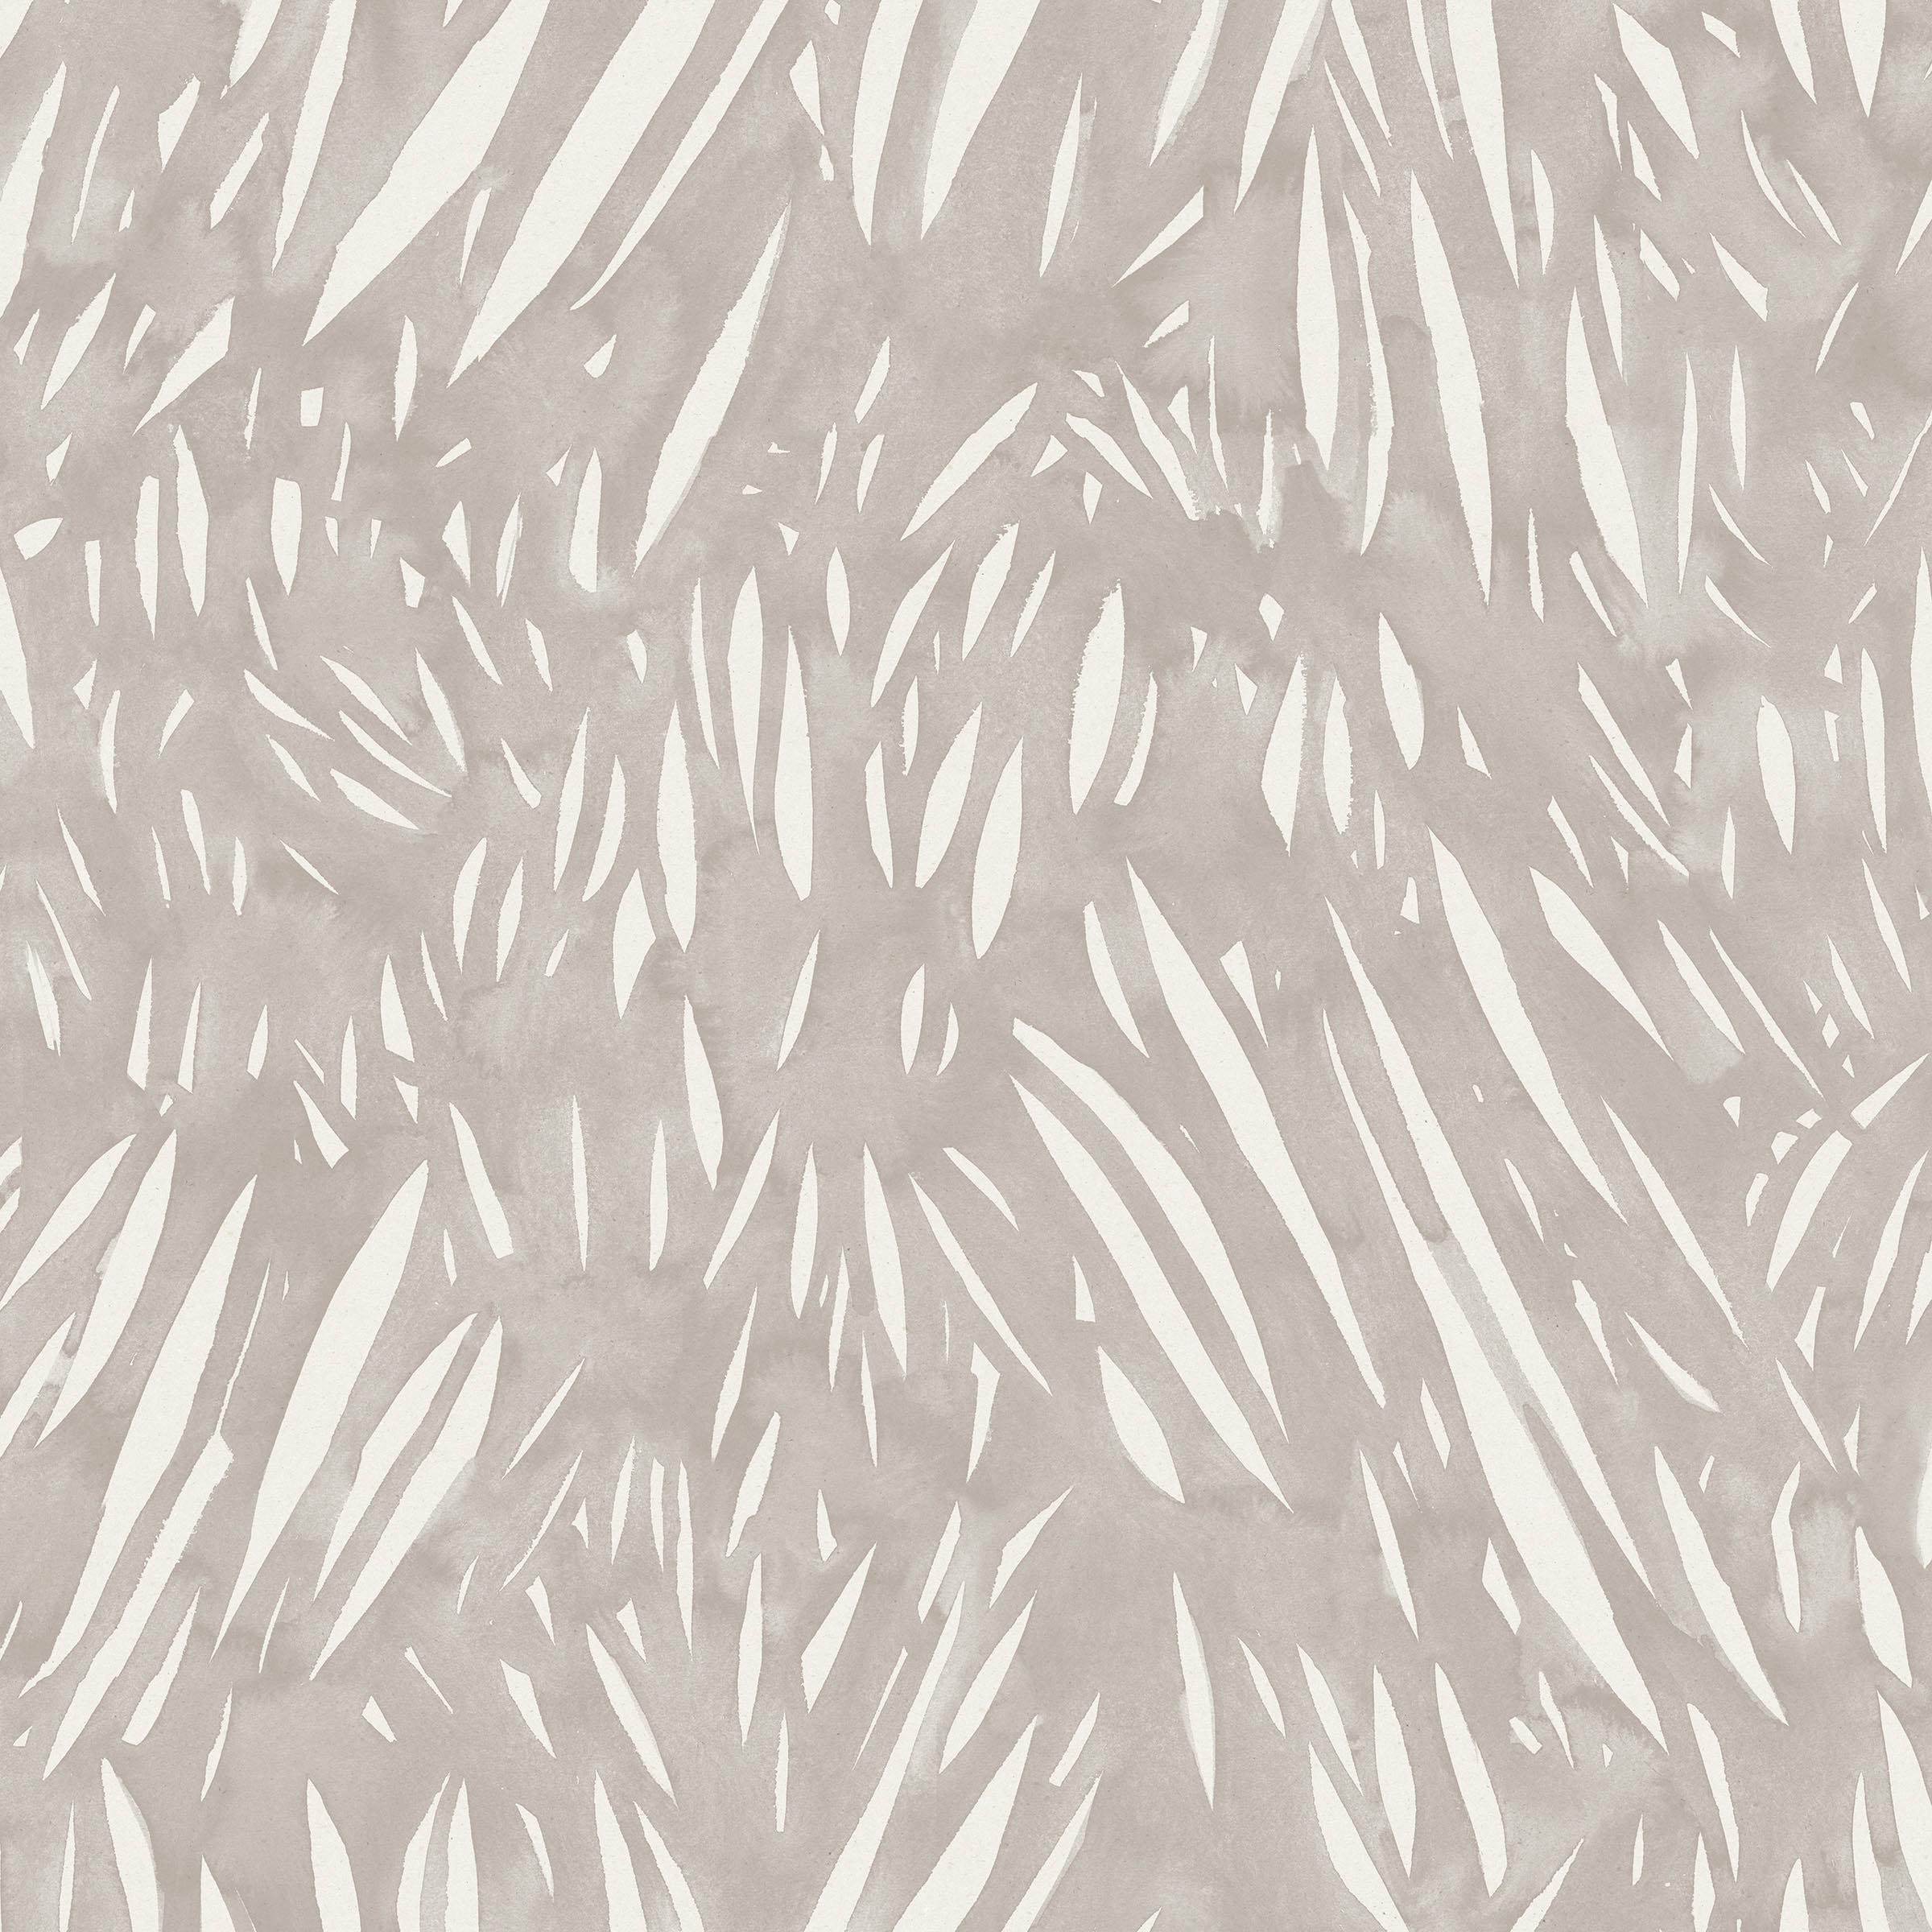 Detail of fabric in an abstract leaf pattern in white on a light gray watercolor field.